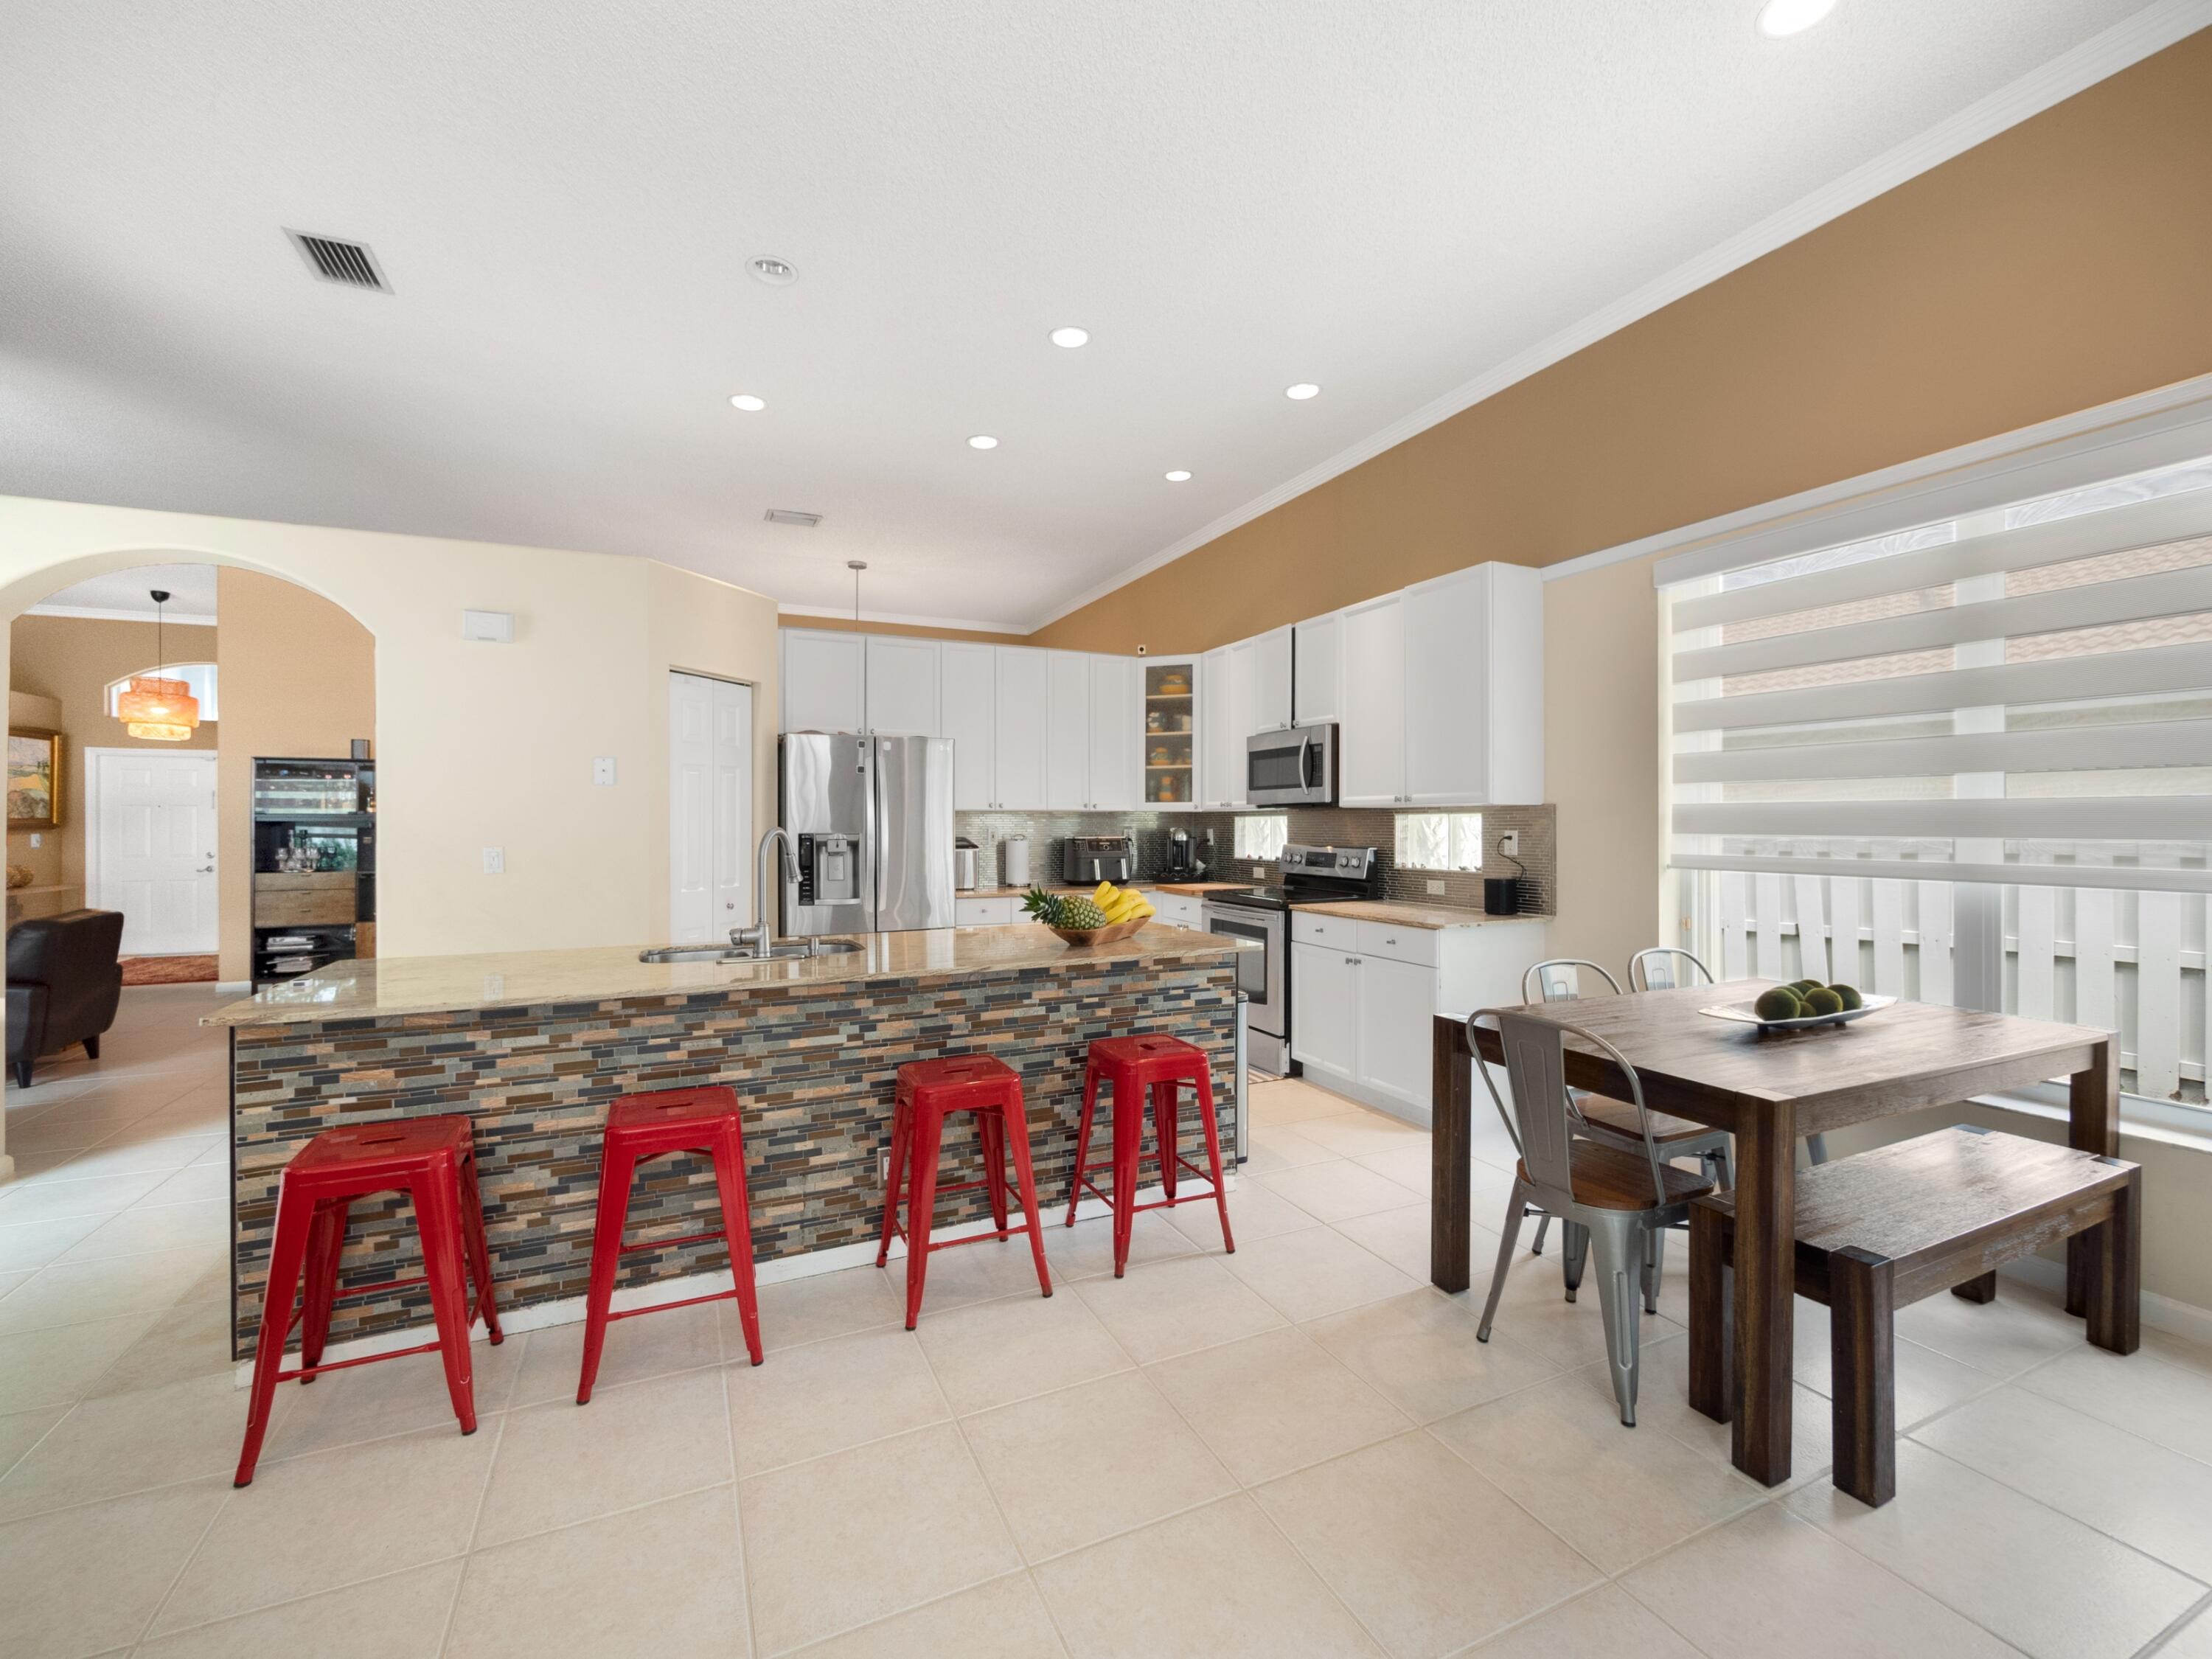 a living room with stainless steel appliances kitchen island granite countertop furniture and a dining table